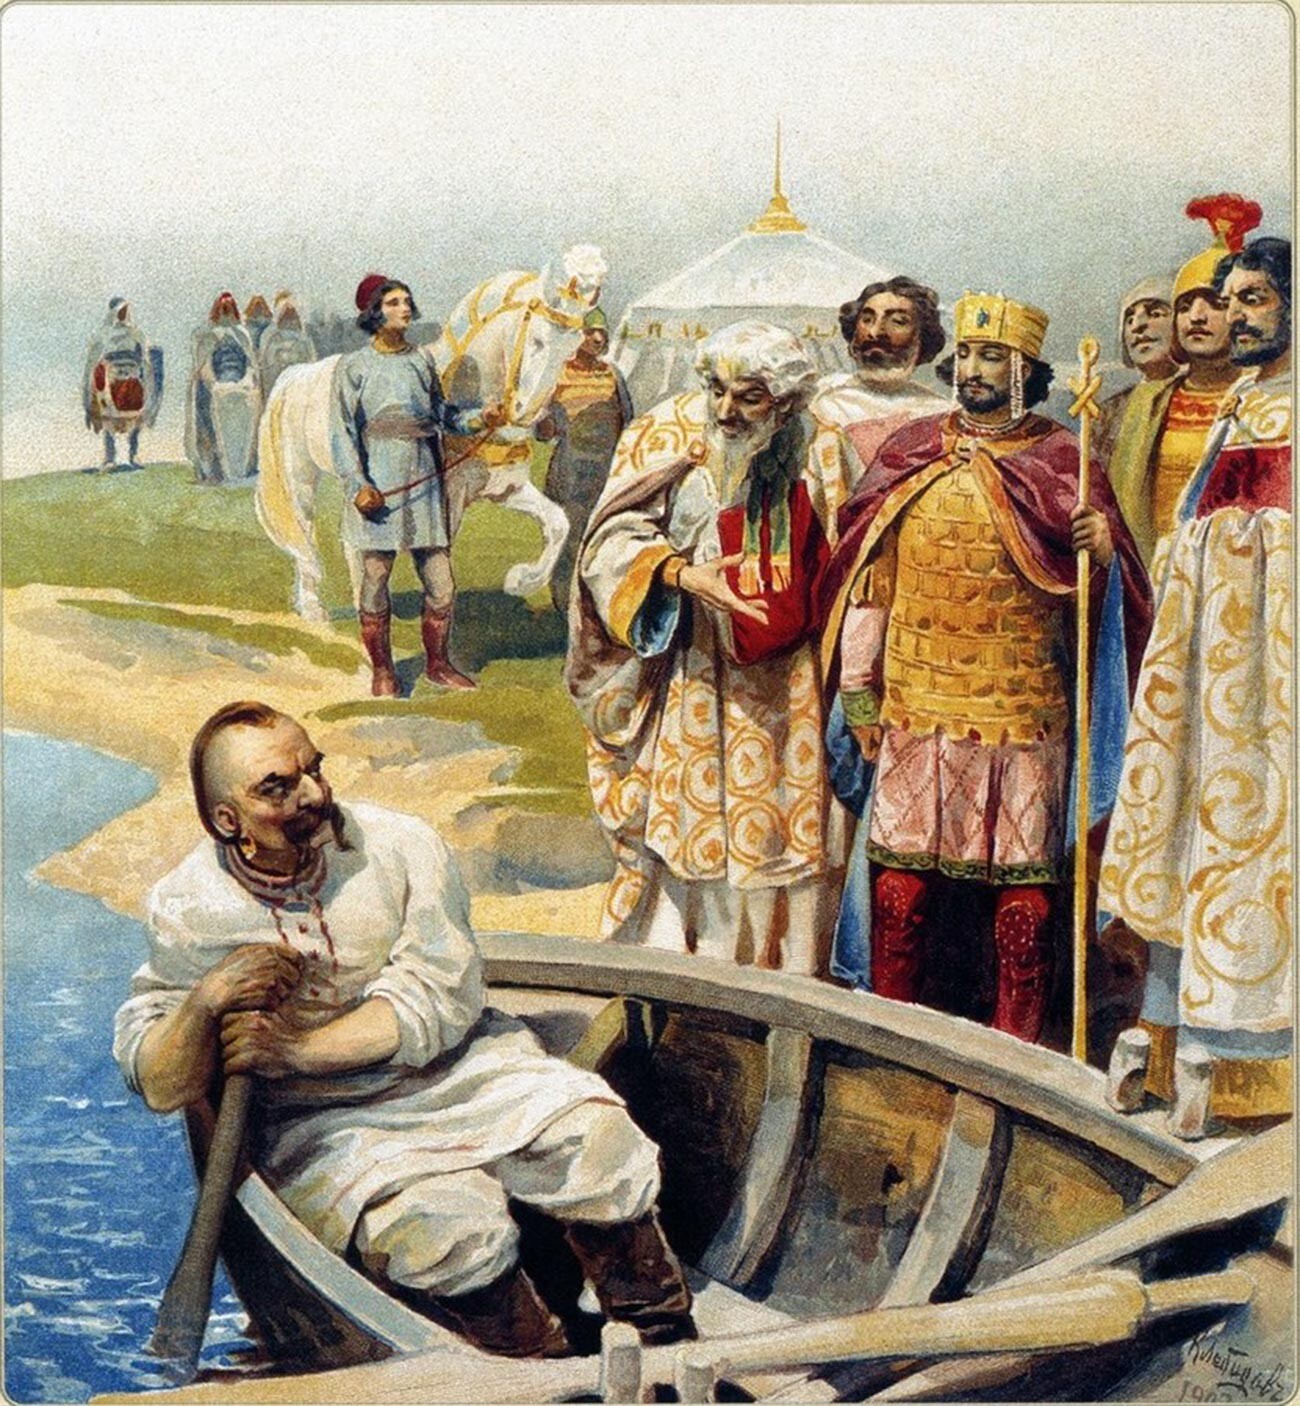 Svyatoslav’s meeting with the Byzantine Emperor Tzimiskes on the shores of the Danube. Son of Igor and Olga, prince Svyatoslav spent all his life in military campaigns. Among the main opponents of the ruler were the nomadic Pechenegs, the Bulgarians and also the Byzantine Empire. 